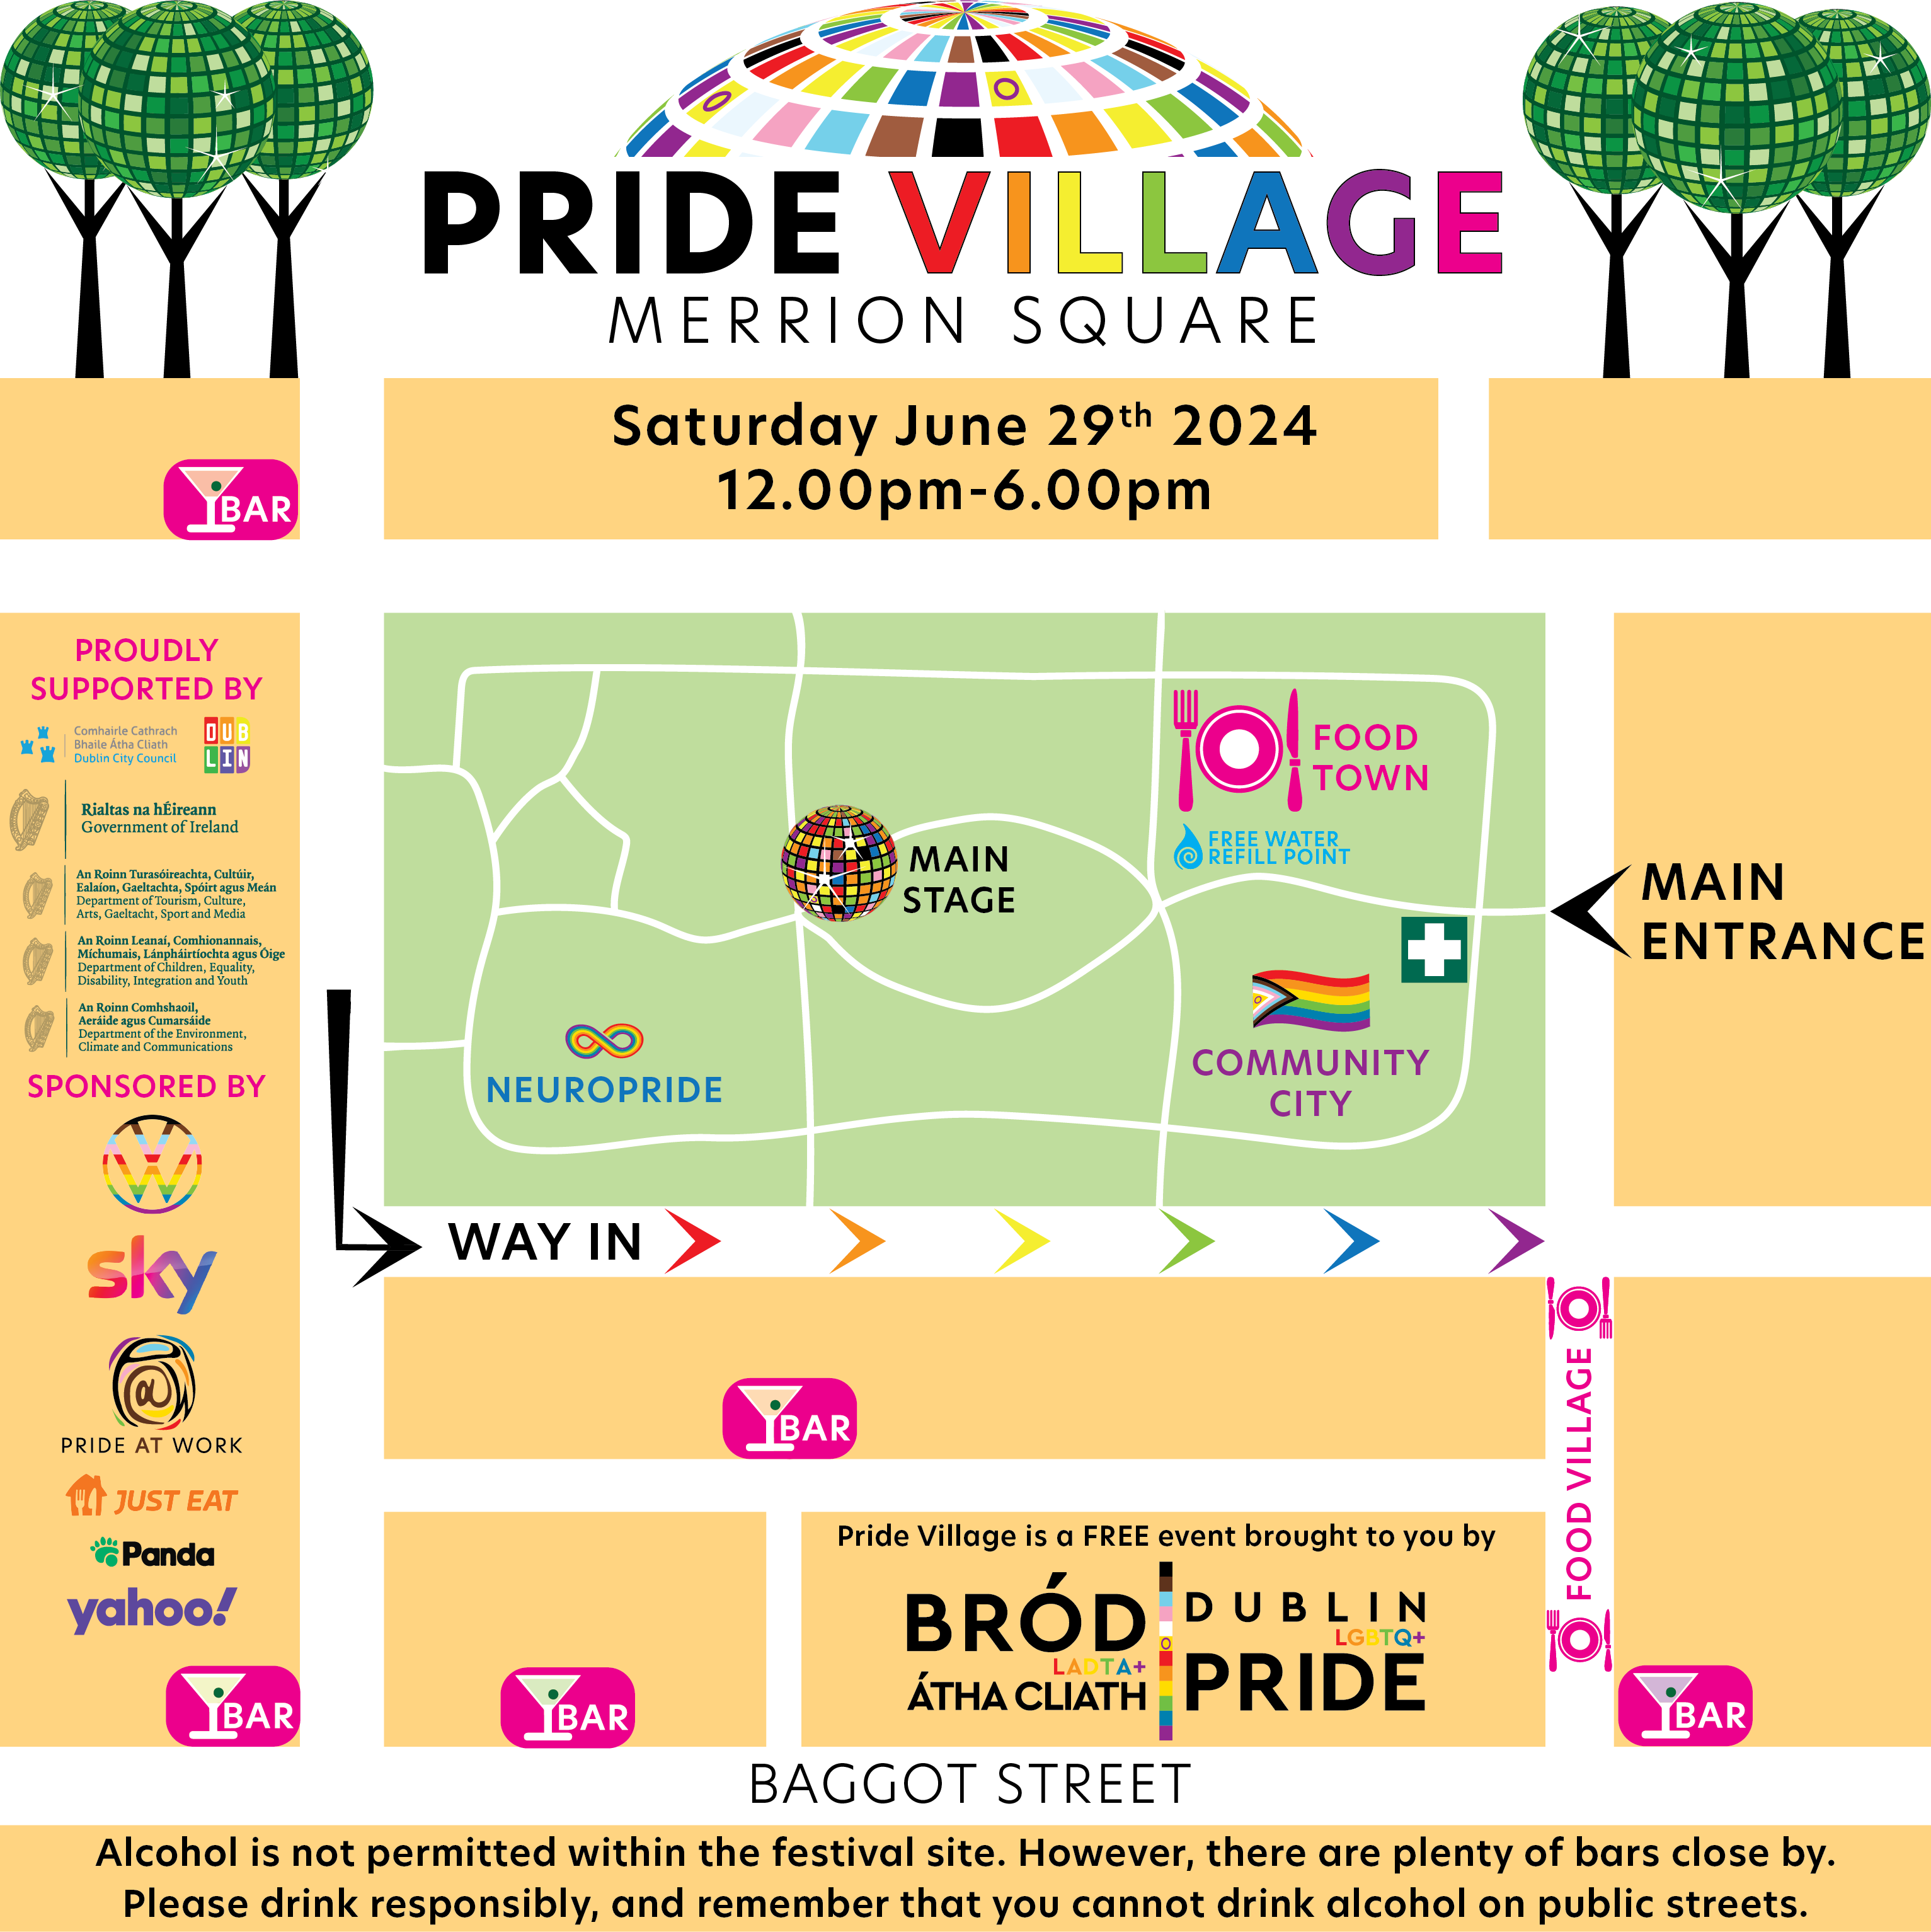 Pride Village - Merrion Square.
Saturday, June 29th, 2024.
12.00pm - 6.00pm.
Proudly supported by Comhairle Cathrach Bhaile Átha Cliath/Dublin City Council; Rilatas na hÉireann/Government of Ireland; An Roinn Turasóireachta, Cultúr, Ealaíon, Gaeltachta, Spóirt agus Meán/Department of Tourism, Culture, Arts, Gaeltacht, Sport and Media; An Roinn Leanaí, Comhionnanas, Míchumais, Lánpháirtíochta agus Óige/Department of Children, Equality, Disability, Integration and Youth; An Roinn Comhshaoil, Aeráide agus Cumarsáide/Department of the Environment, Climate and Communications.

Sponsored by Volkswagen, Sky, Pride At Work, Just Eat, Panda, Yahoo!

Pride Village is a FREE event brought to you by Bród LADTA+ Átha Cliath/Dublin LGBTQ+ Pride.

Alcohol is not permitted within the festival site. However, there are plenty of bars close by. Please drink responsibly and remember that you cannot drink alcohol on public streets.

Image is a map of Merrion Square Park showing the following locations:
Main Entrance
Community City
Food Town
Main Stage
NeuroPride Zone
Food Village
Free Water Refill Point